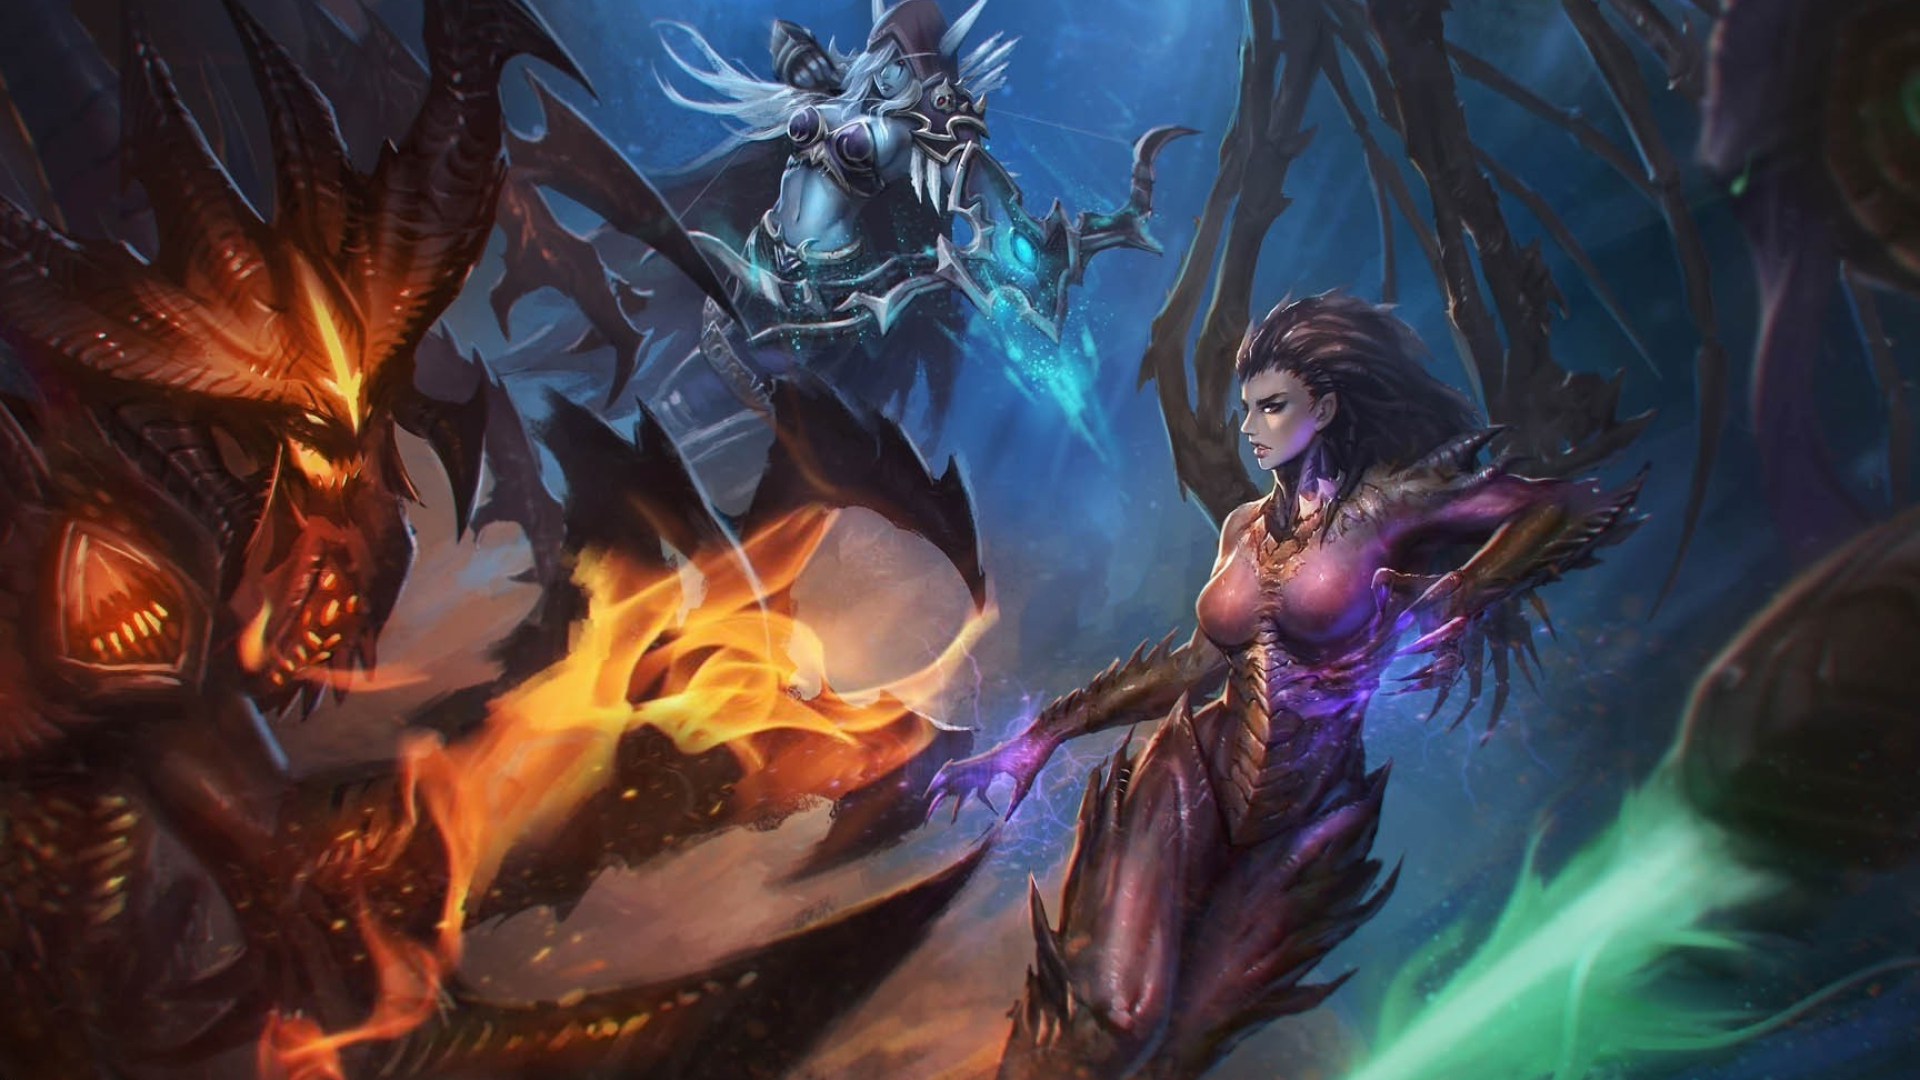 Heroes of the Storm, Storm wallpapers, Blizzard entertainment, MOBA game, 1920x1080 Full HD Desktop